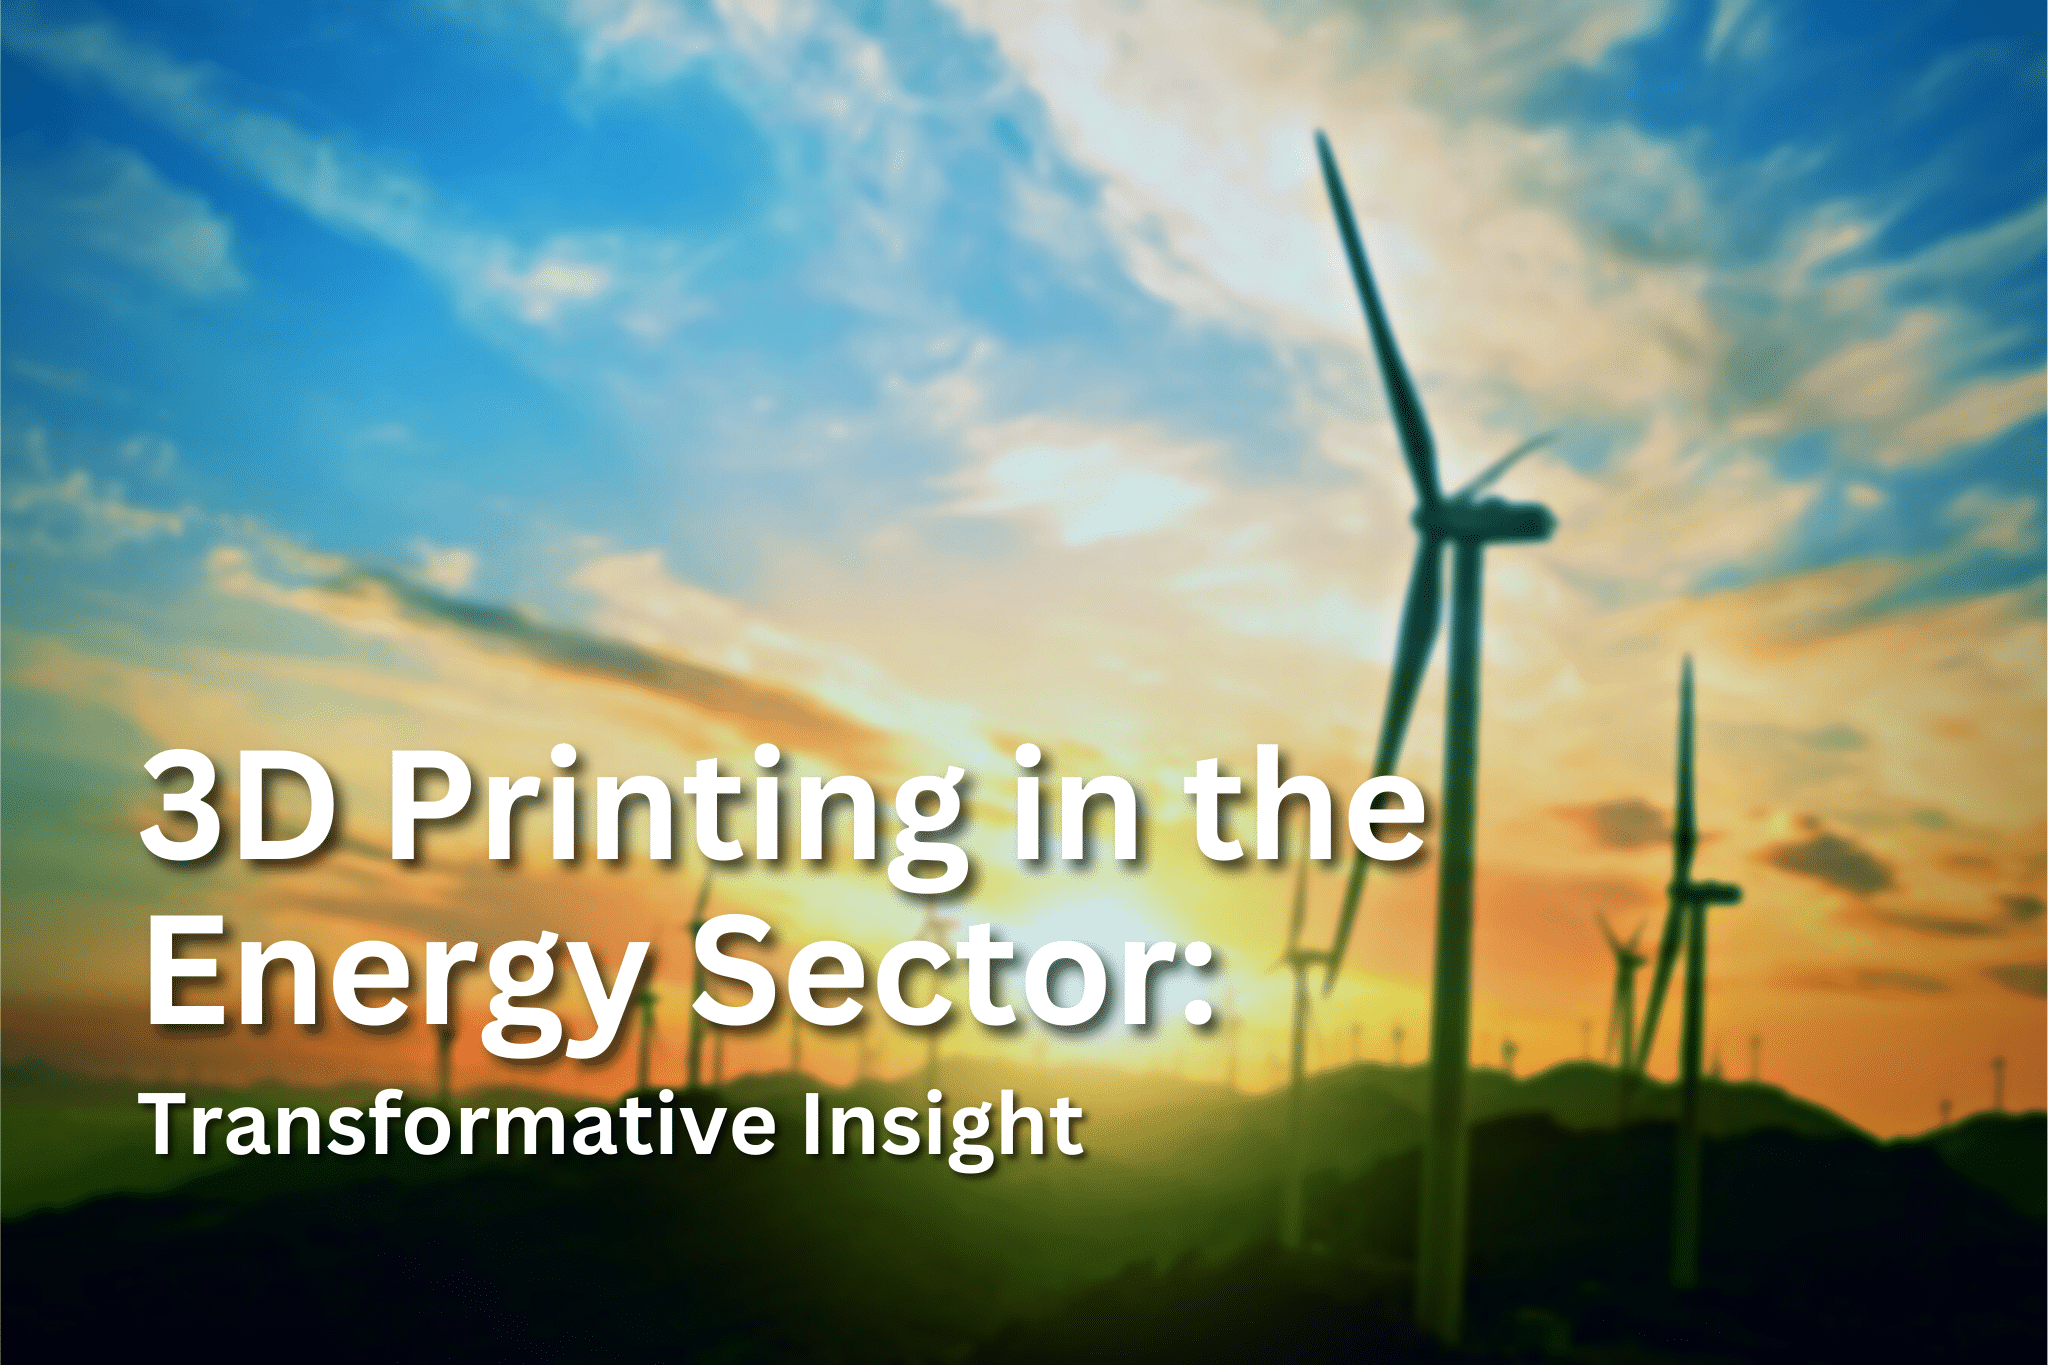 3D Printing in the Energy Sector: Transformative Insights